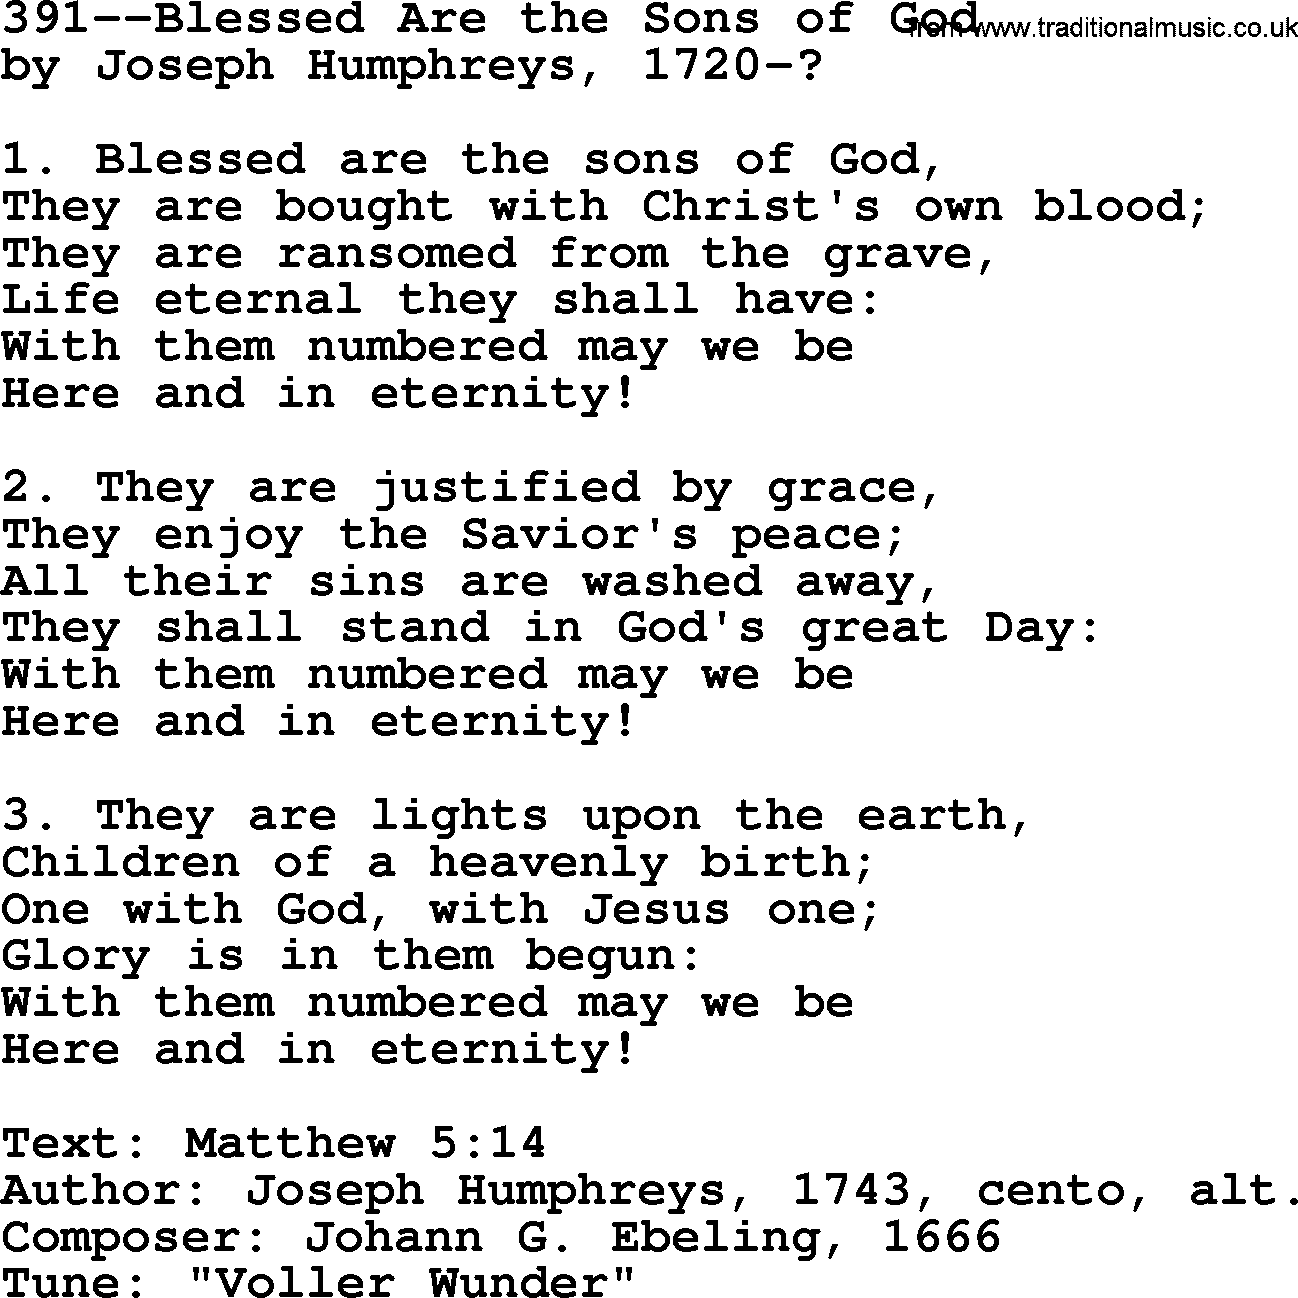 Lutheran Hymn: 391--Blessed Are the Sons of God.txt lyrics with PDF